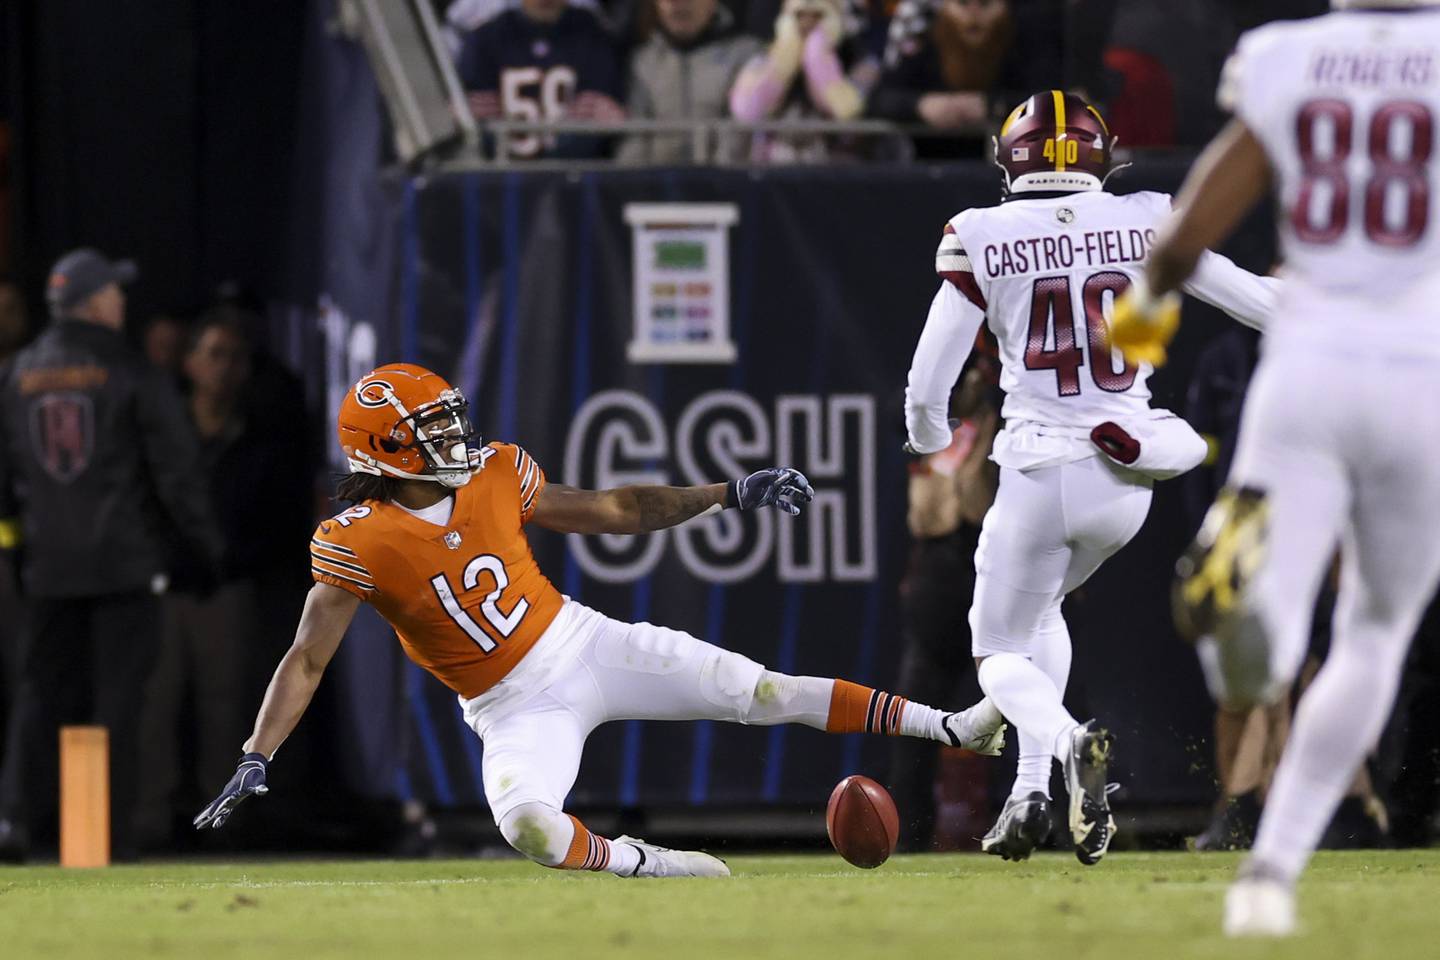 Bears wide receiver Velus Jones Jr. drops a punt return during the fourth quarter against the Commanders at Soldier Field on Oct. 13, 2022.